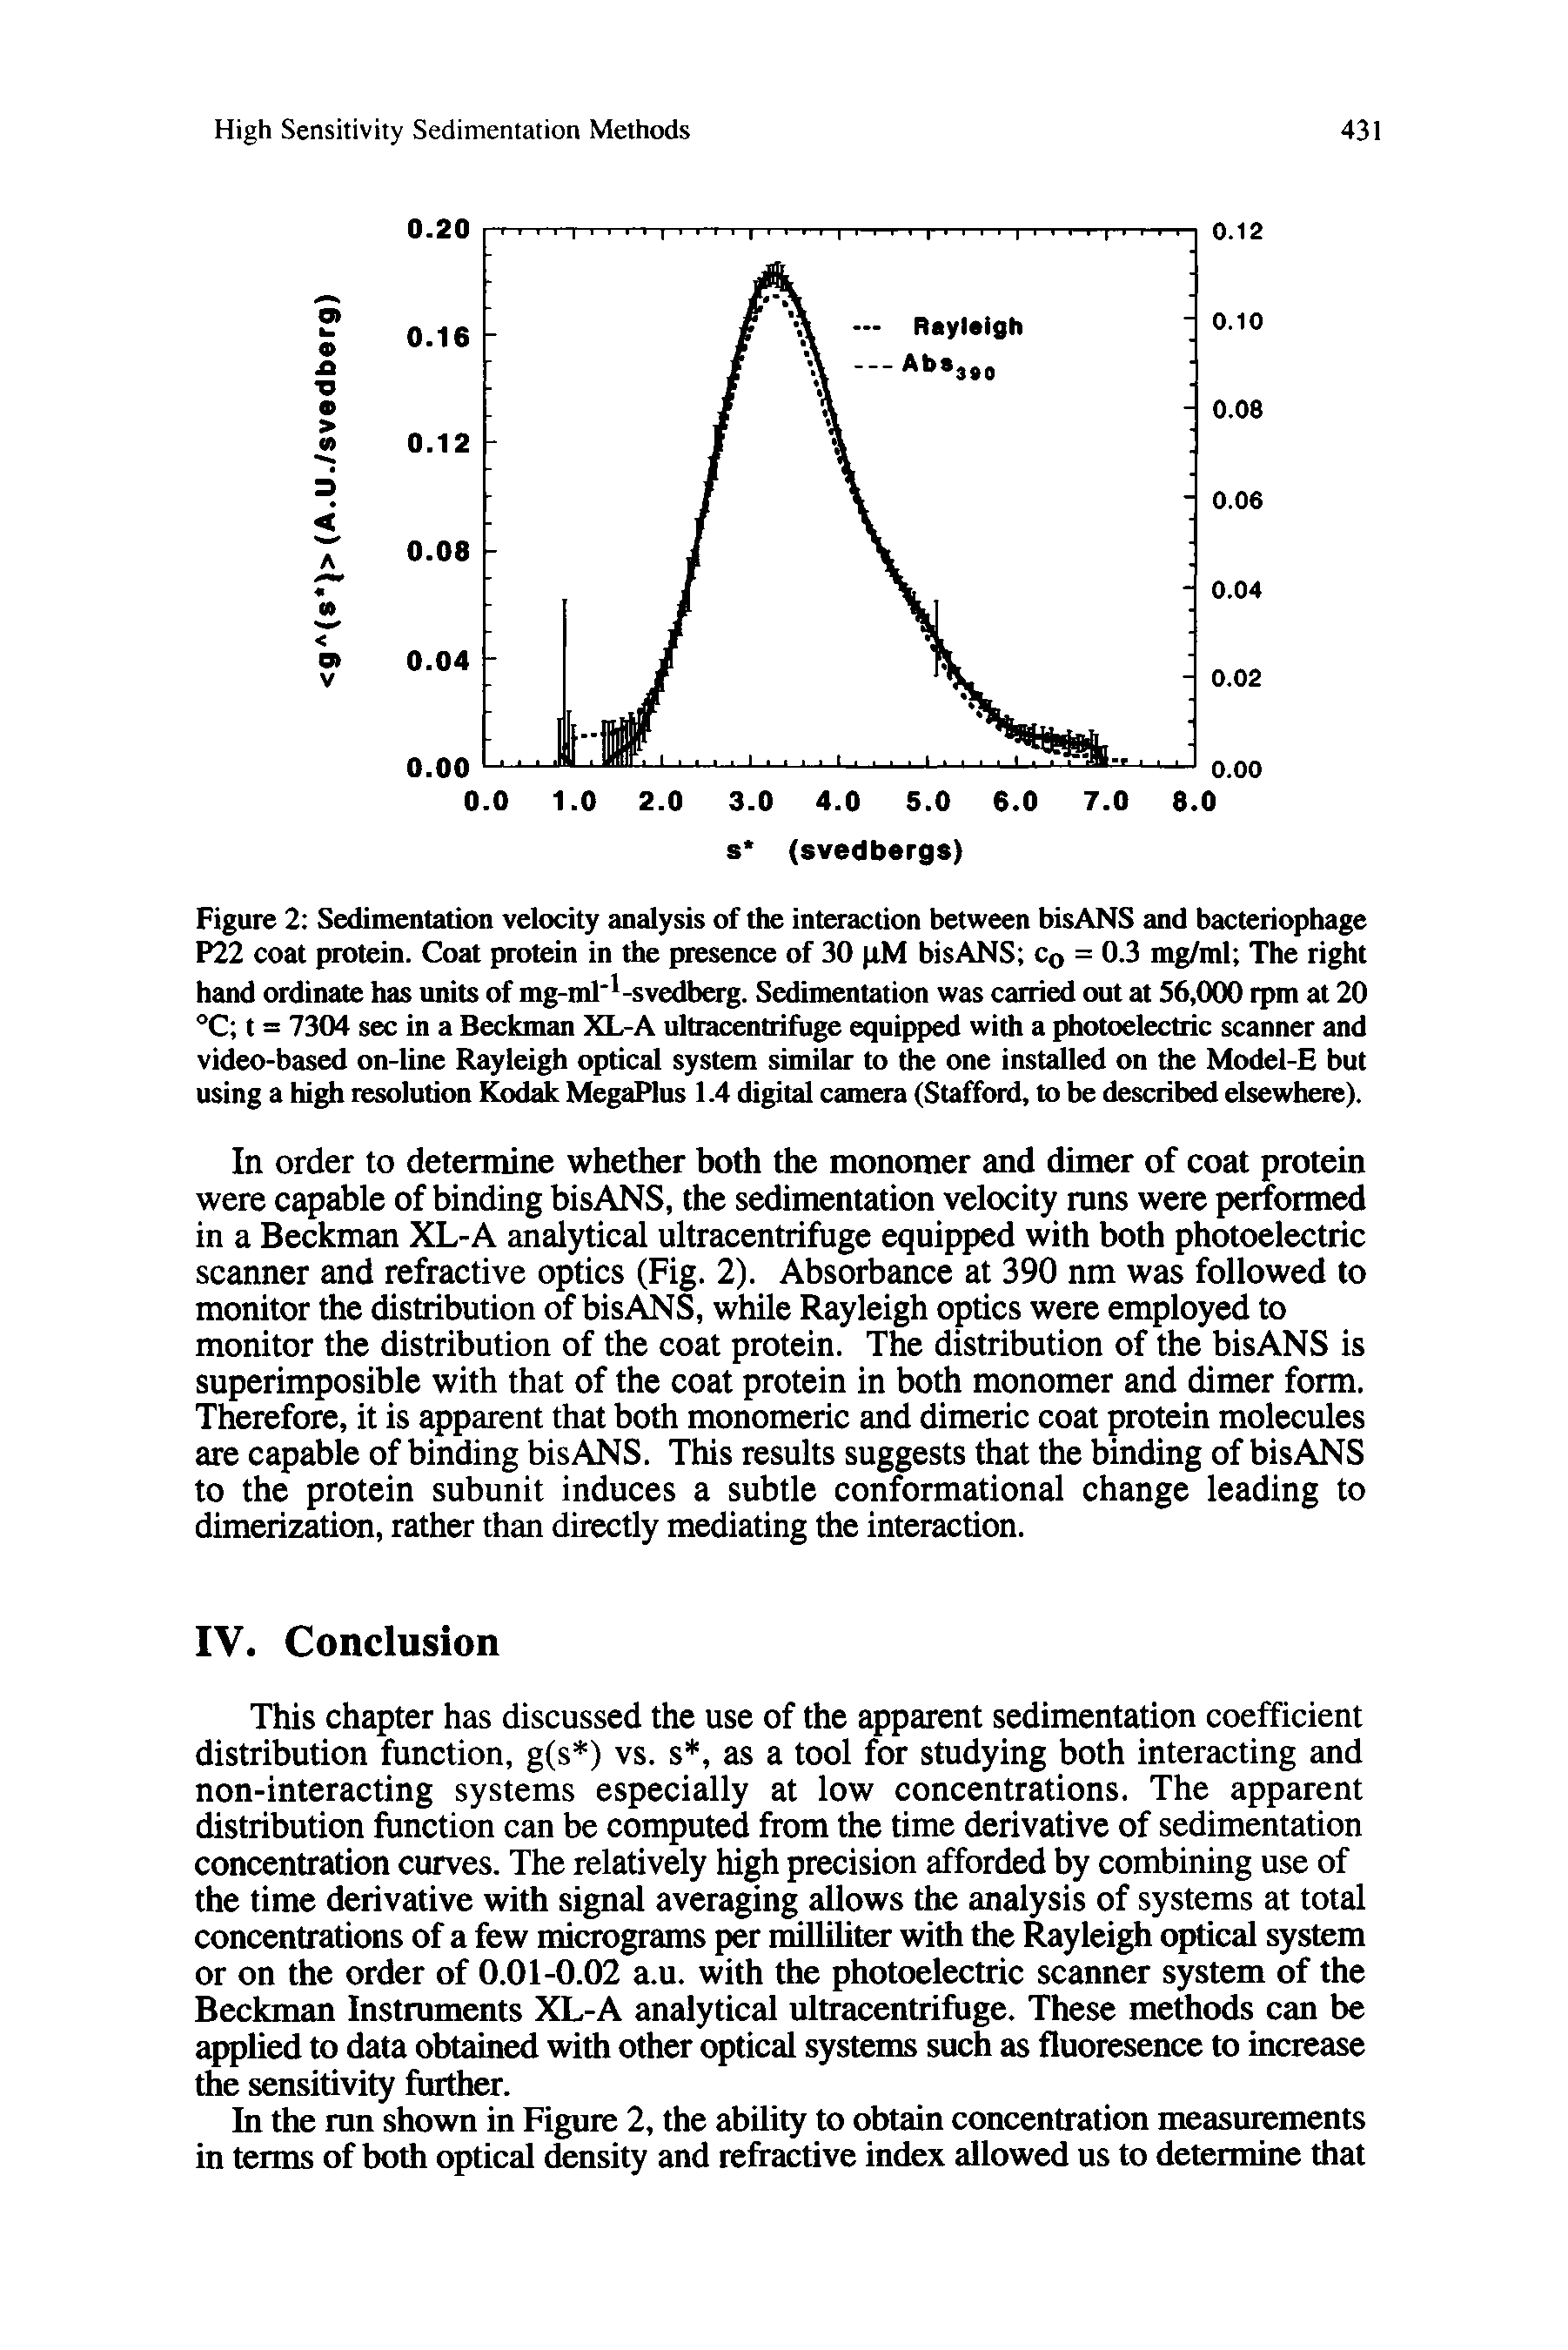 Figure 2 Sedimentation velocity analysis of the interaction between bisANS and bacteriophage P22 coat protein. Coat protein in the presence of 30 pM bisANS Co = 0.3 mg/ml The right hand ordinate has units of mg-ml -svedberg. Sedimentation was carried out at 56,000 rpm at 20 °C t = 7304 sec in a Beckman XL-A ultracentrifuge equipped with a photoelectric scanner and video-based on-line Rayleigh optical system similar to the one installed on the Model-E but using a high resolution Kodak MegaPlus 1.4 digital camera (Stafford, to be described elsewhere).